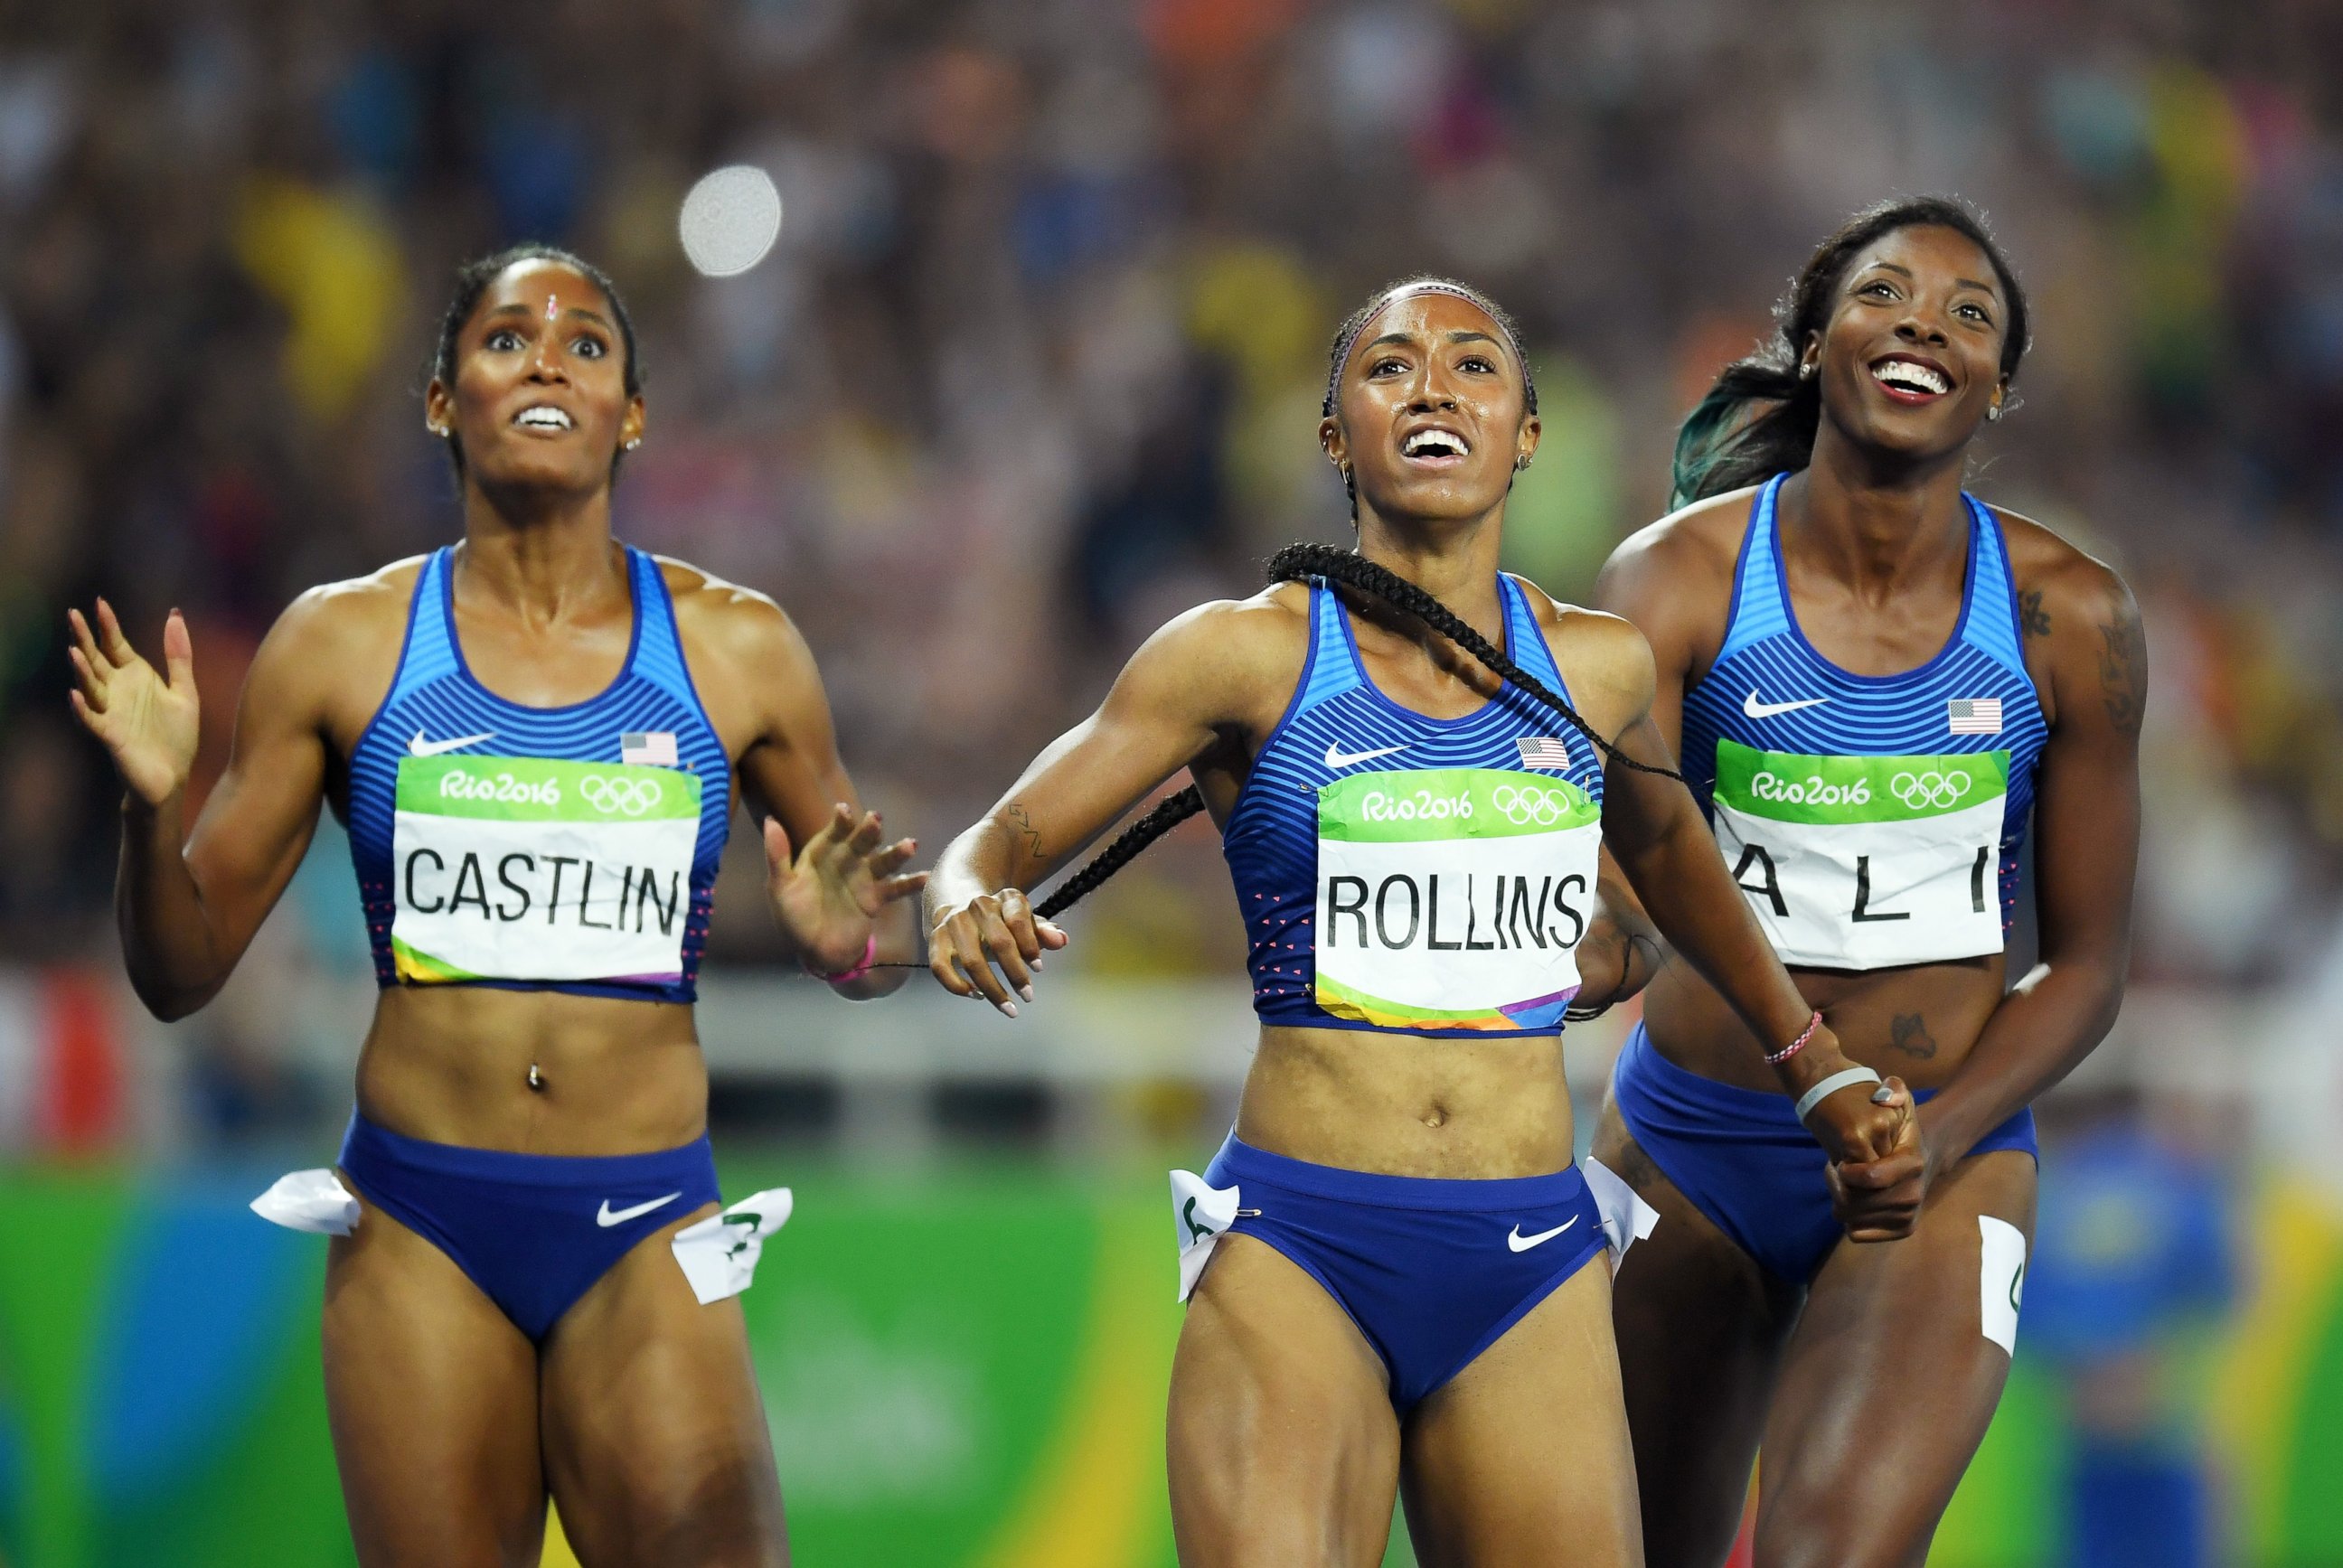 PHOTO: Bronze medalist Kristi Castlin, gold medalist Brianna Rollins and silver medalist Nia Ali of the United States react after the Women's 100m Hurdles Final